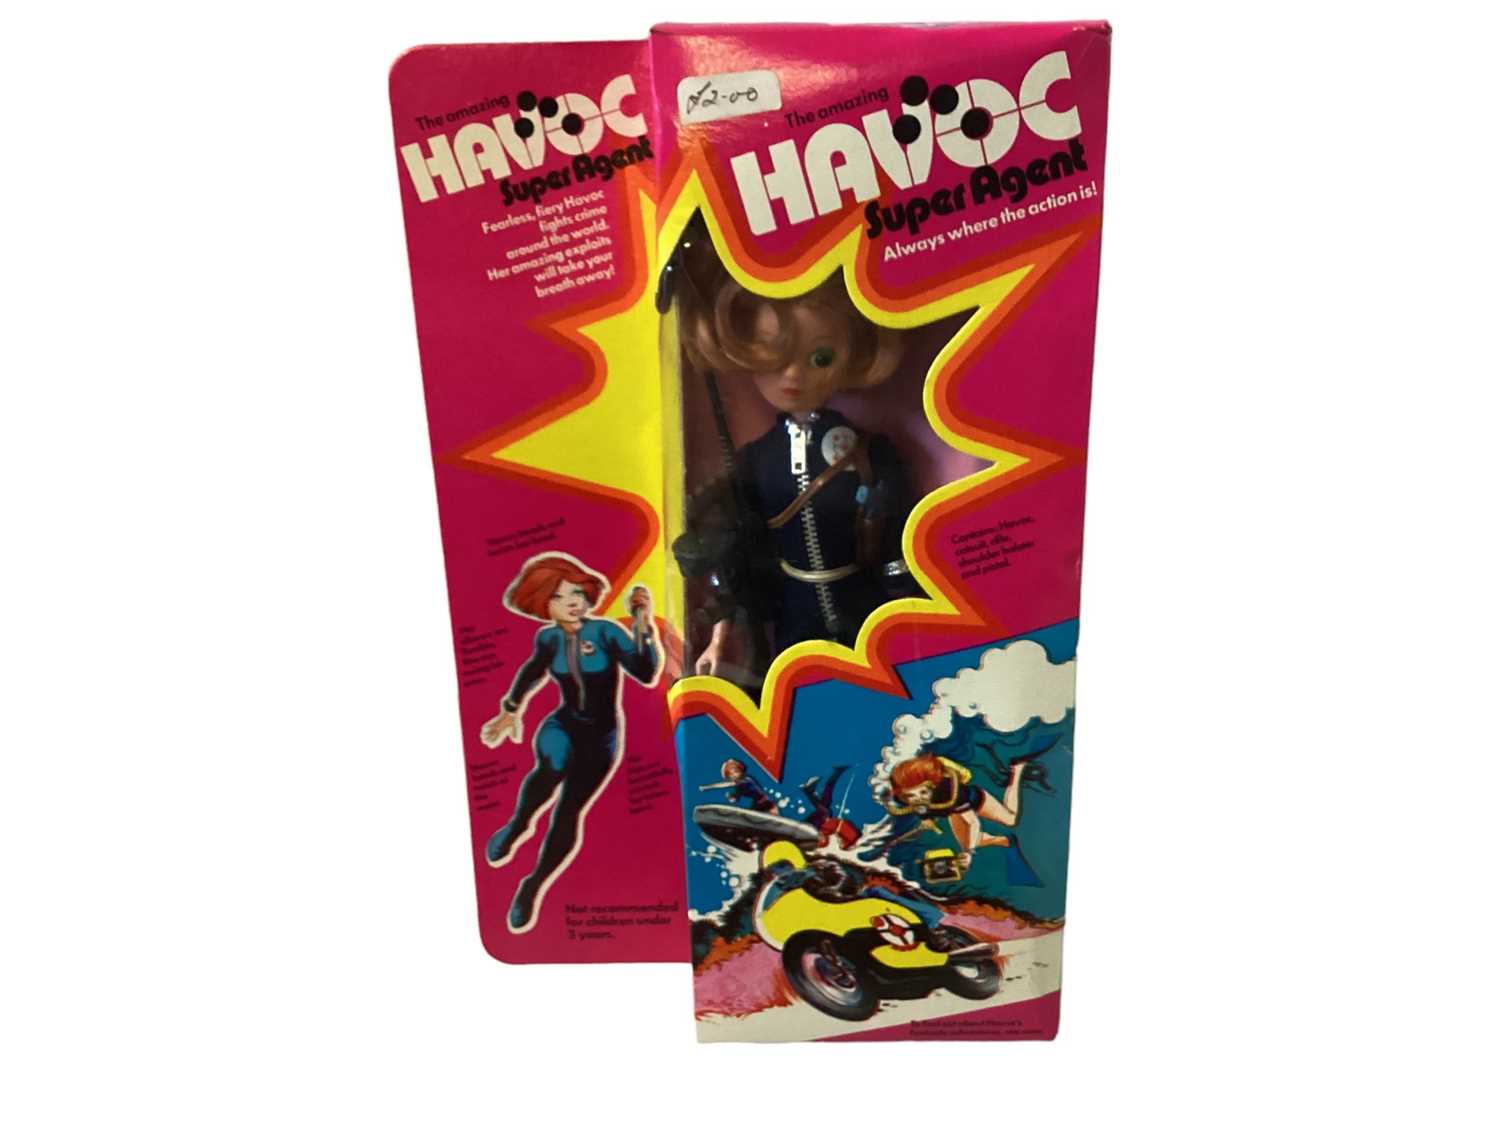 Lot 373 - Model Toys Limited The Amazing Havoc Super Agent 9 1/2" action figure, in window box No.75001 & Race Against Death outfit, on card & blister pack (2)